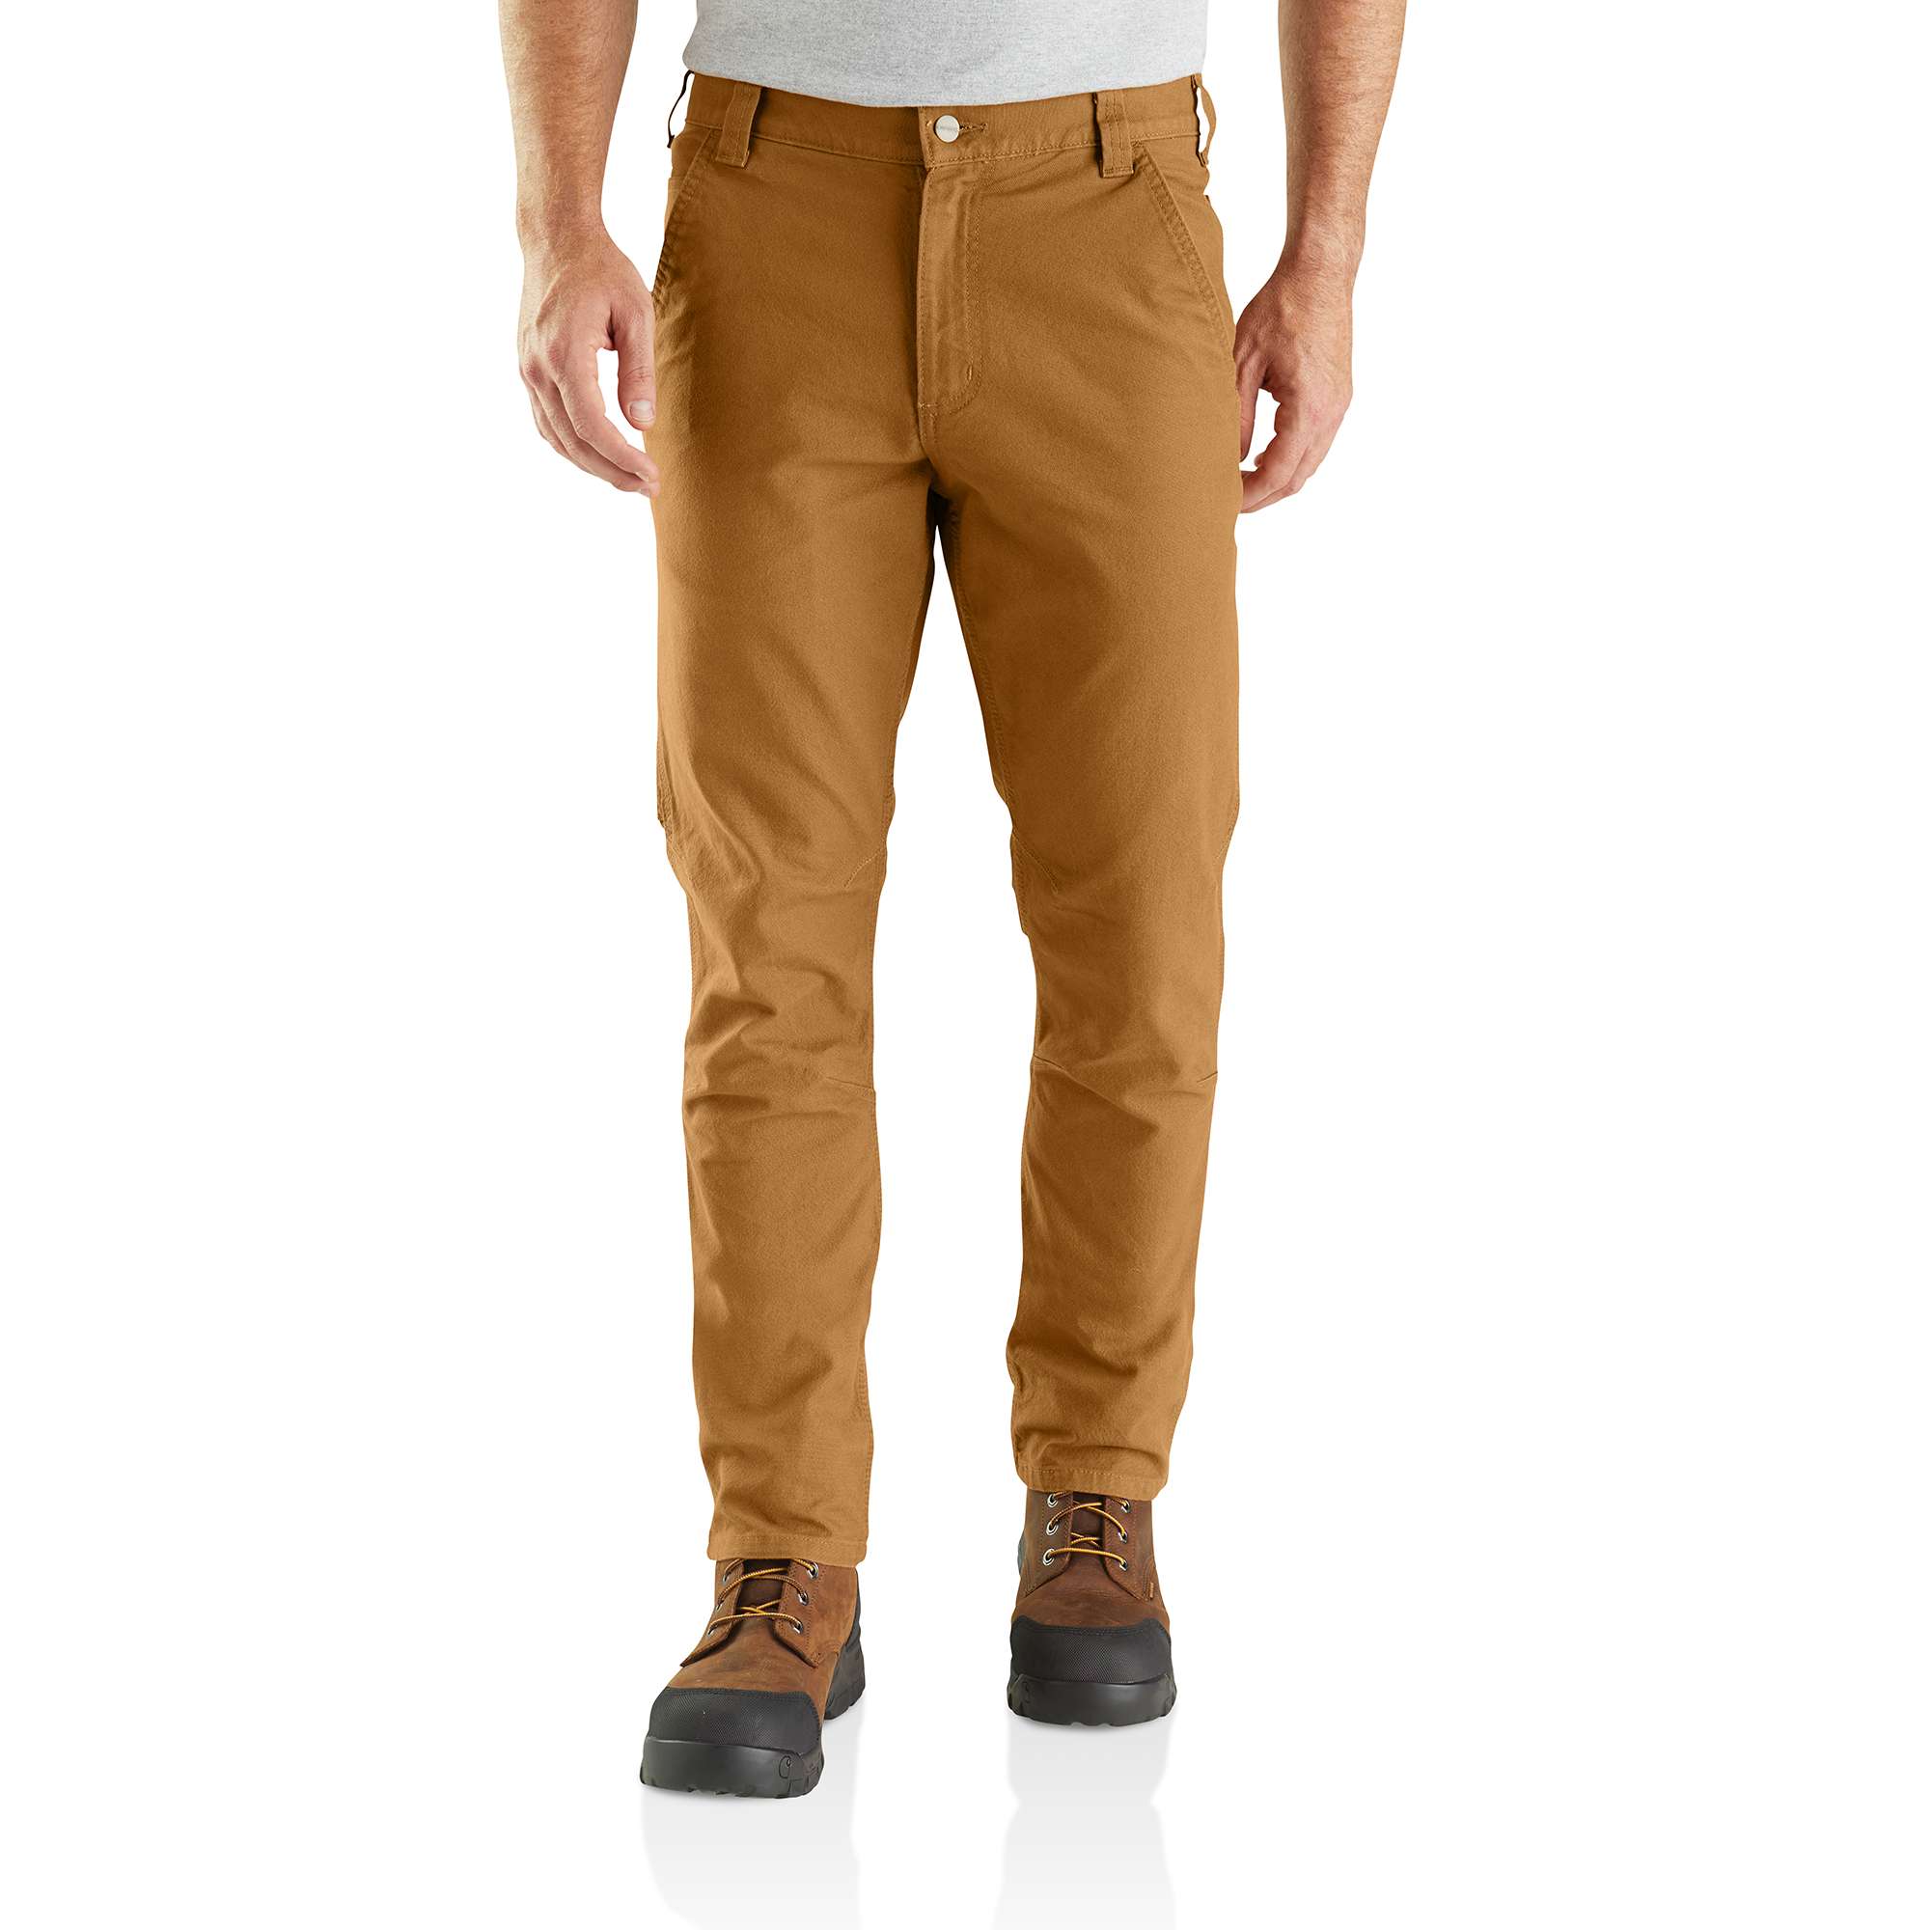 RUGGED FLEX™ RELAXED FIT 5-POCKET JEAN